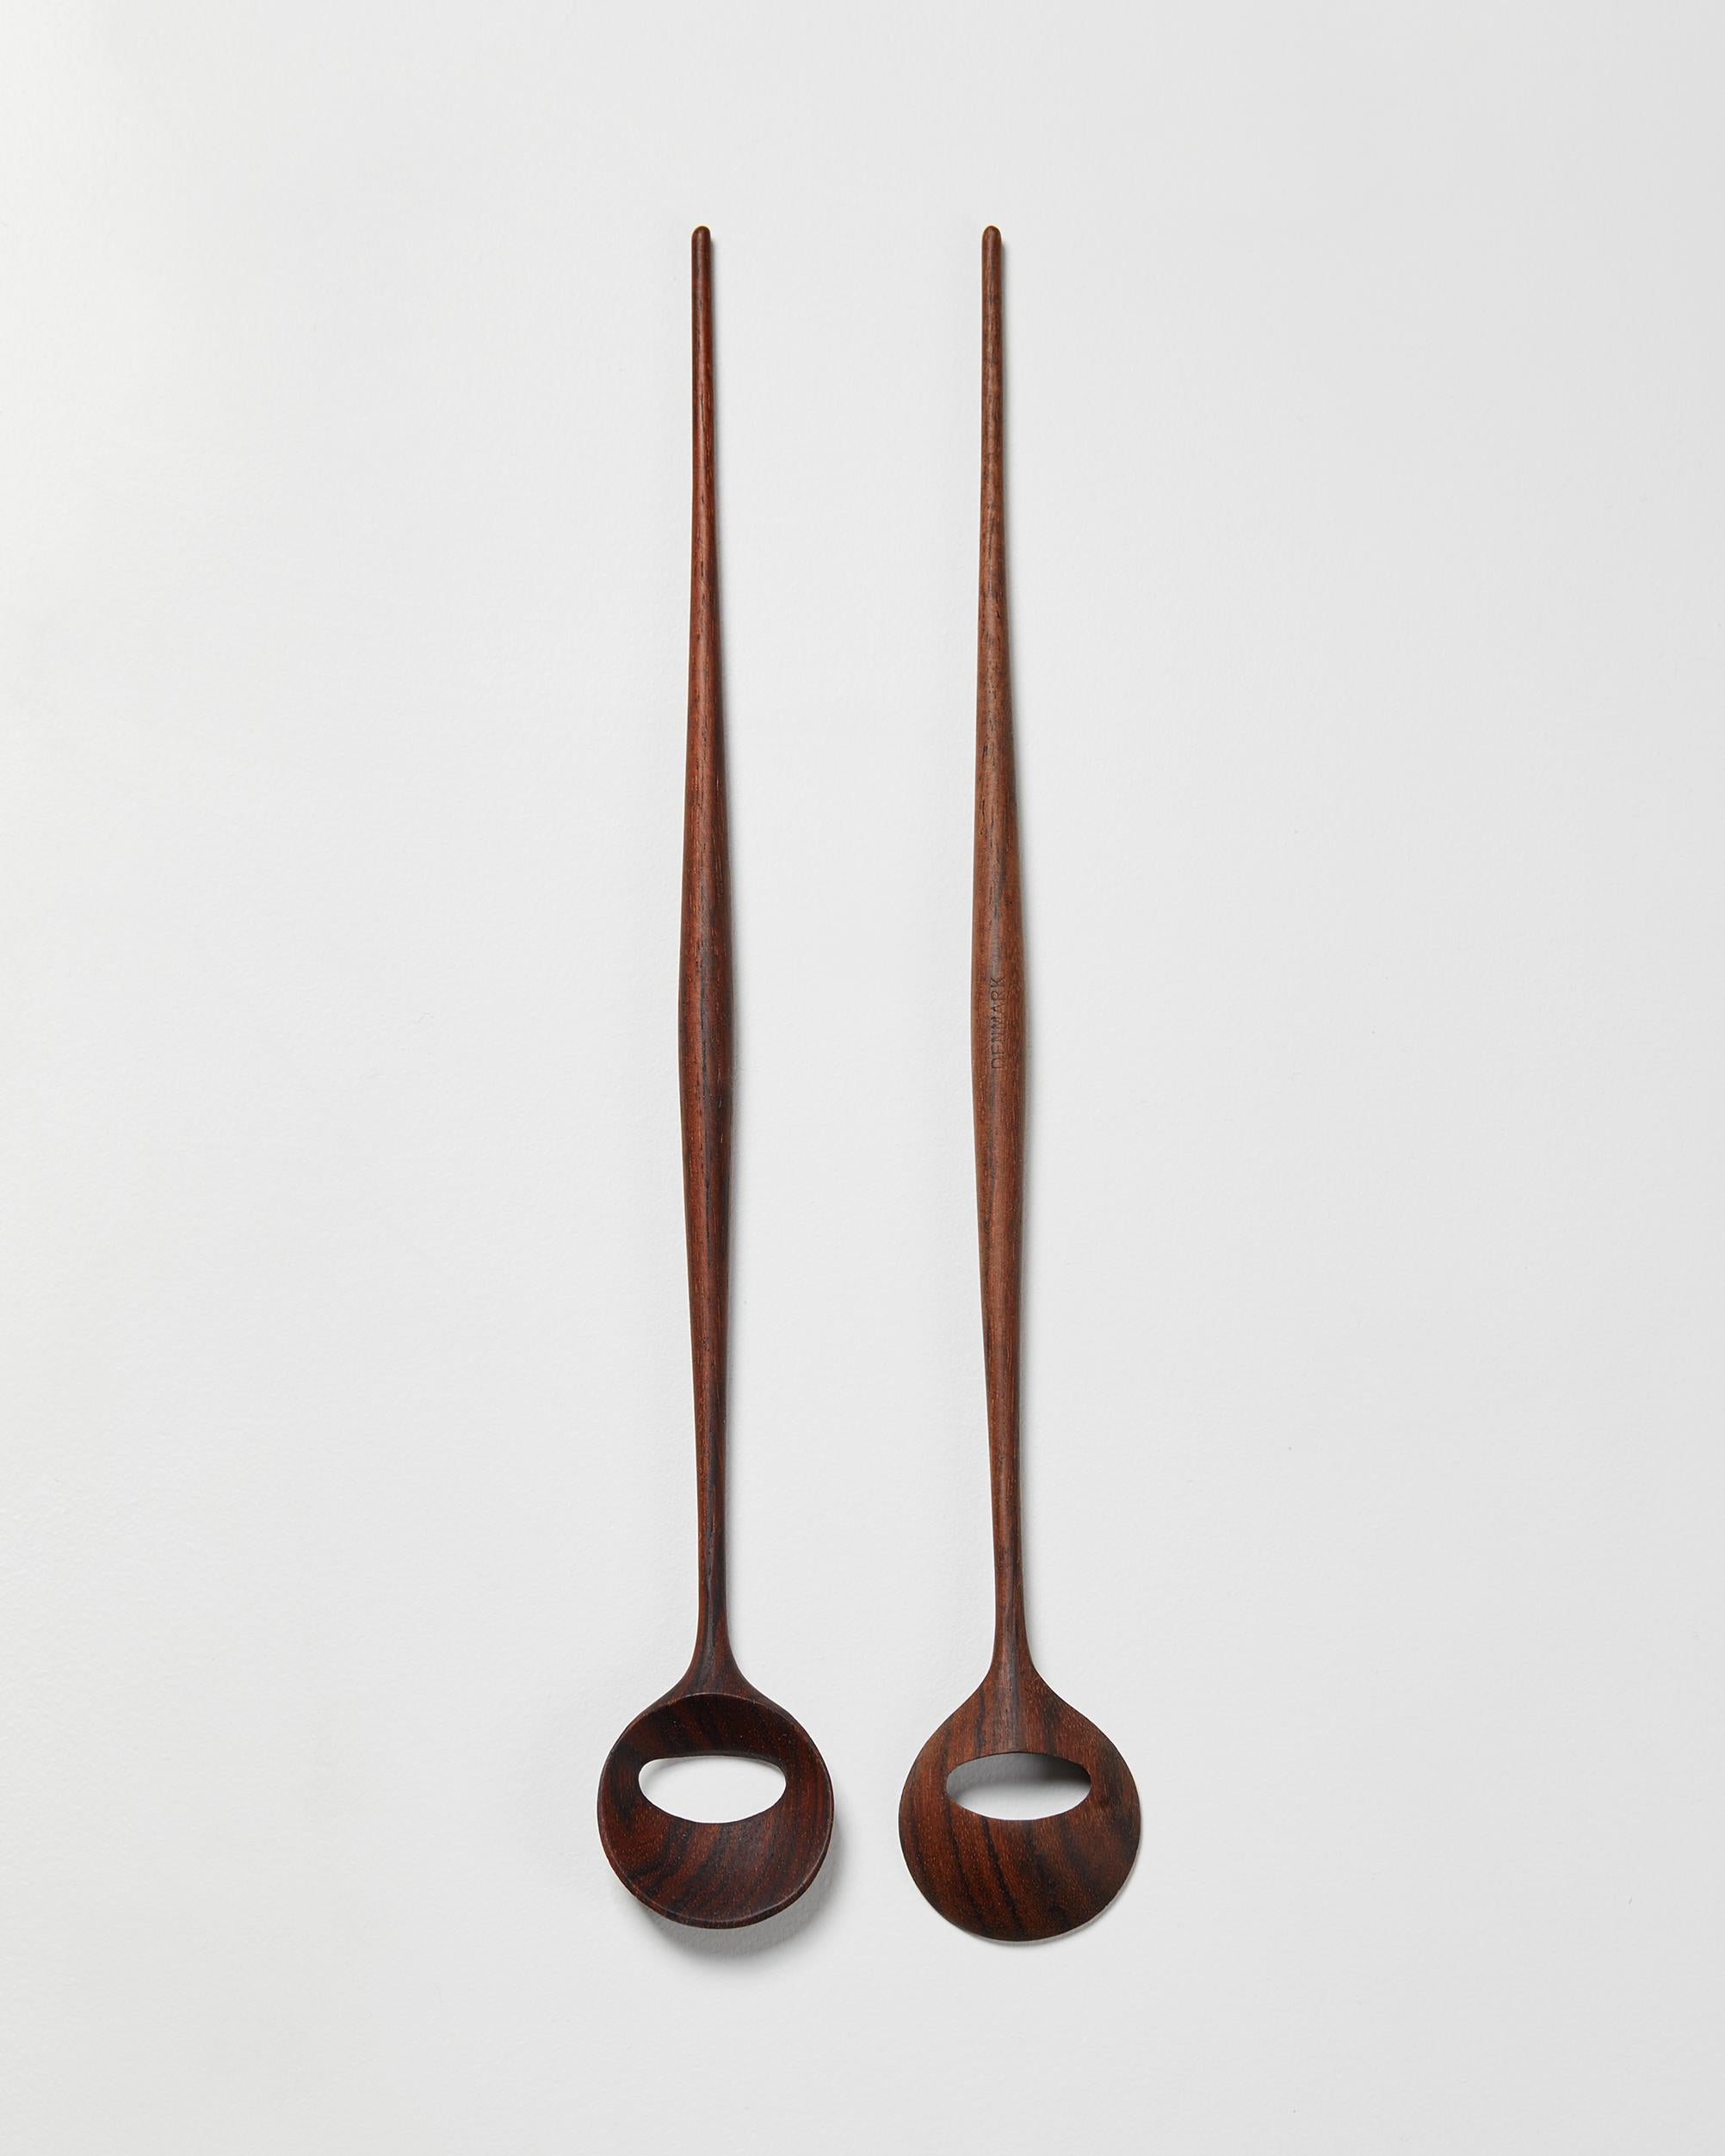 Pair of serving spoons, made by Magne Monsen,
Denmark. 1950s.
Rosewood.

Measures: L: 35 cm / 13 3/4